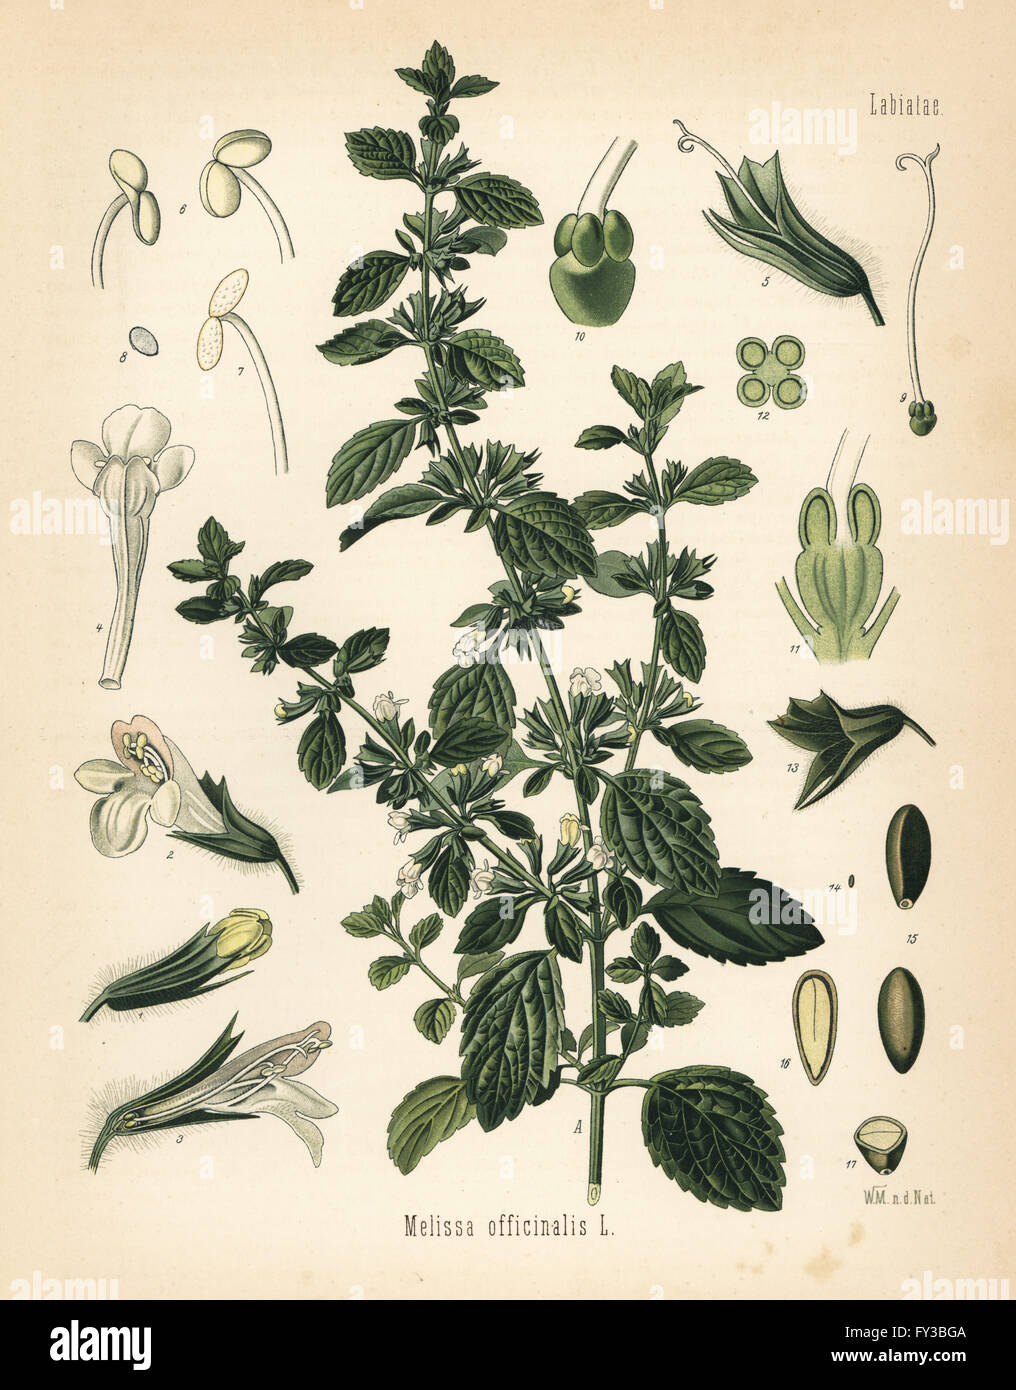 Lemon balm or balm mint, Melissa officinalis. Chromolithograph after a botanical illustration by Walther Muller from Hermann Adolph Koehler's Medicinal Plants, edited by Gustav Pabst, Koehler, Germany, 1887. Stock Photo